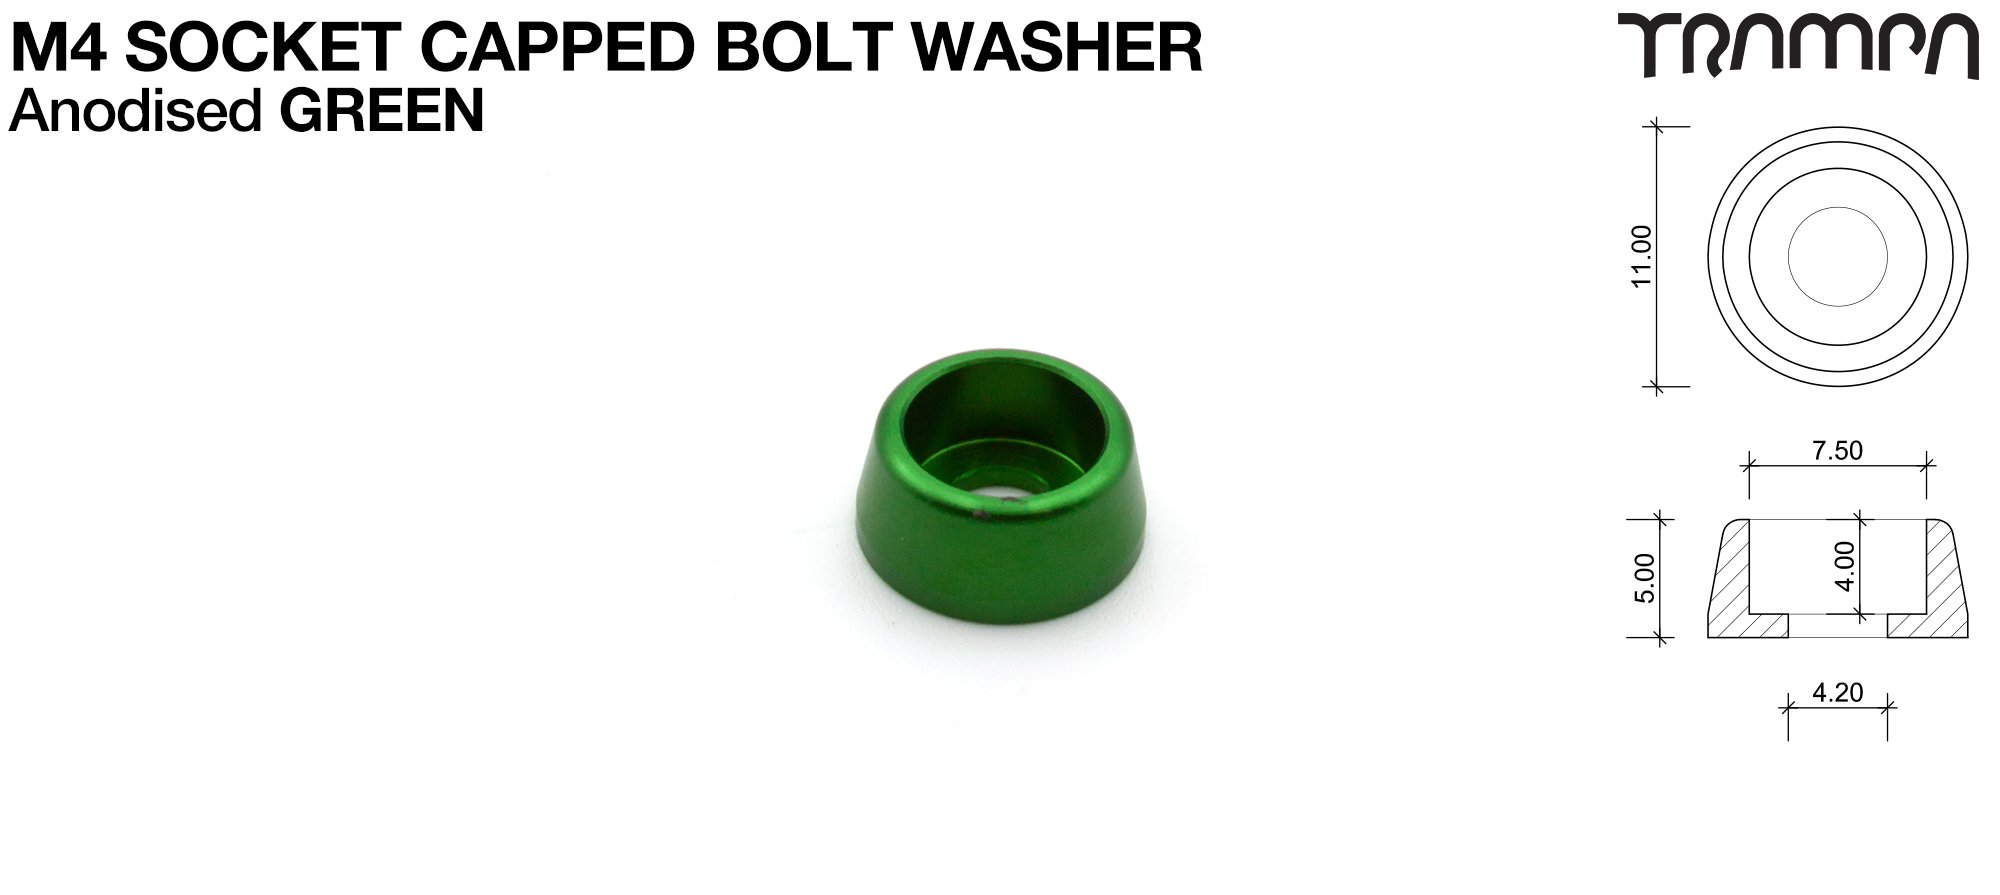 M4 Socket Capped Washer - Anodised GREEN